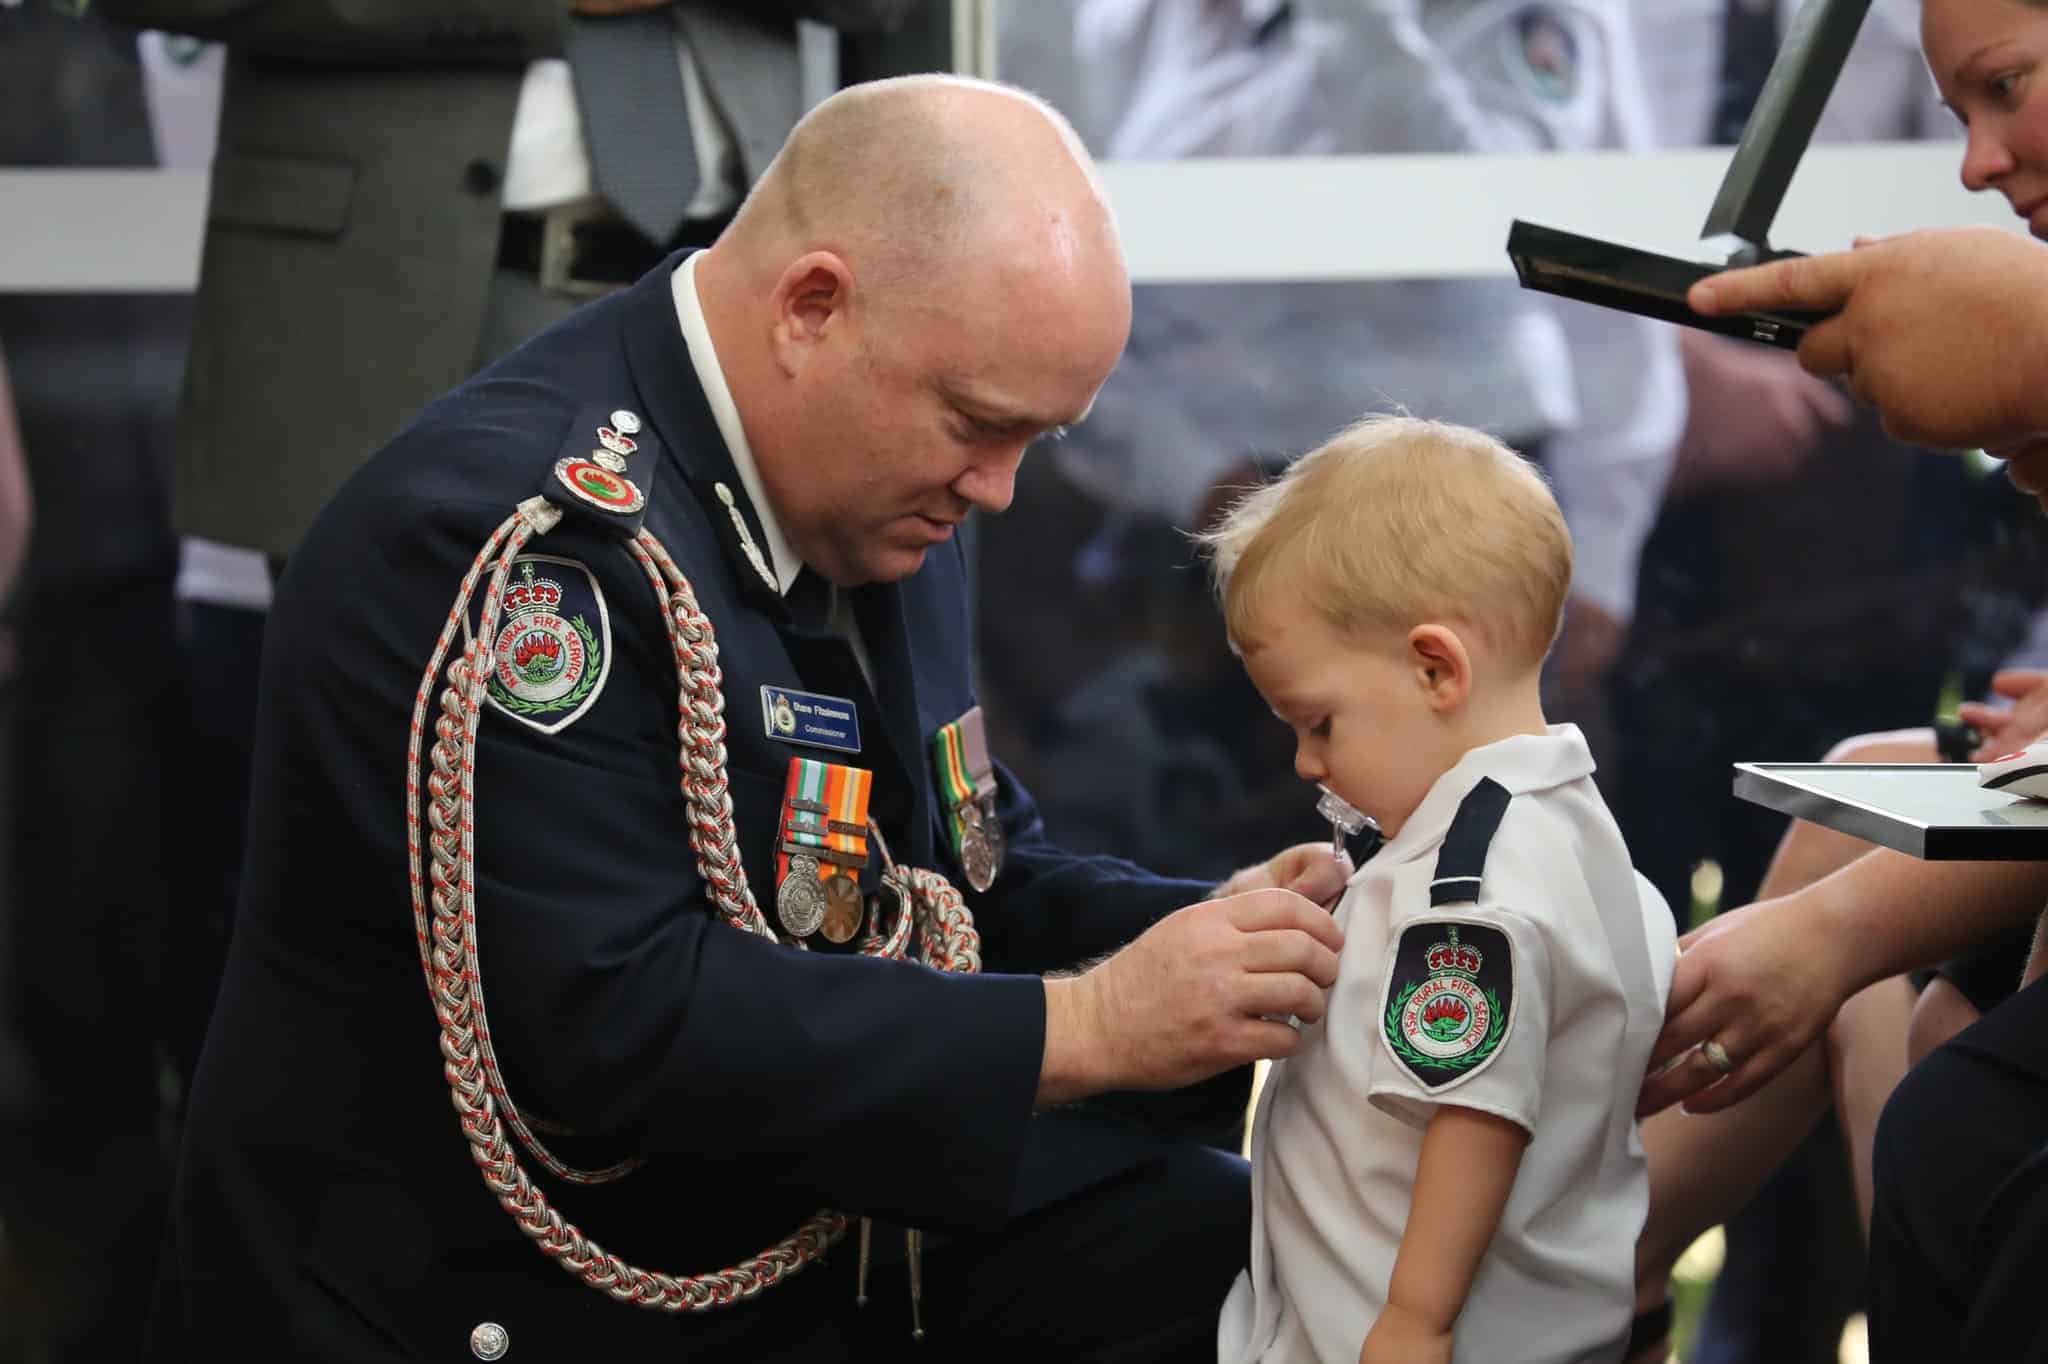 Bravery award for dead firefighter presented to infant son